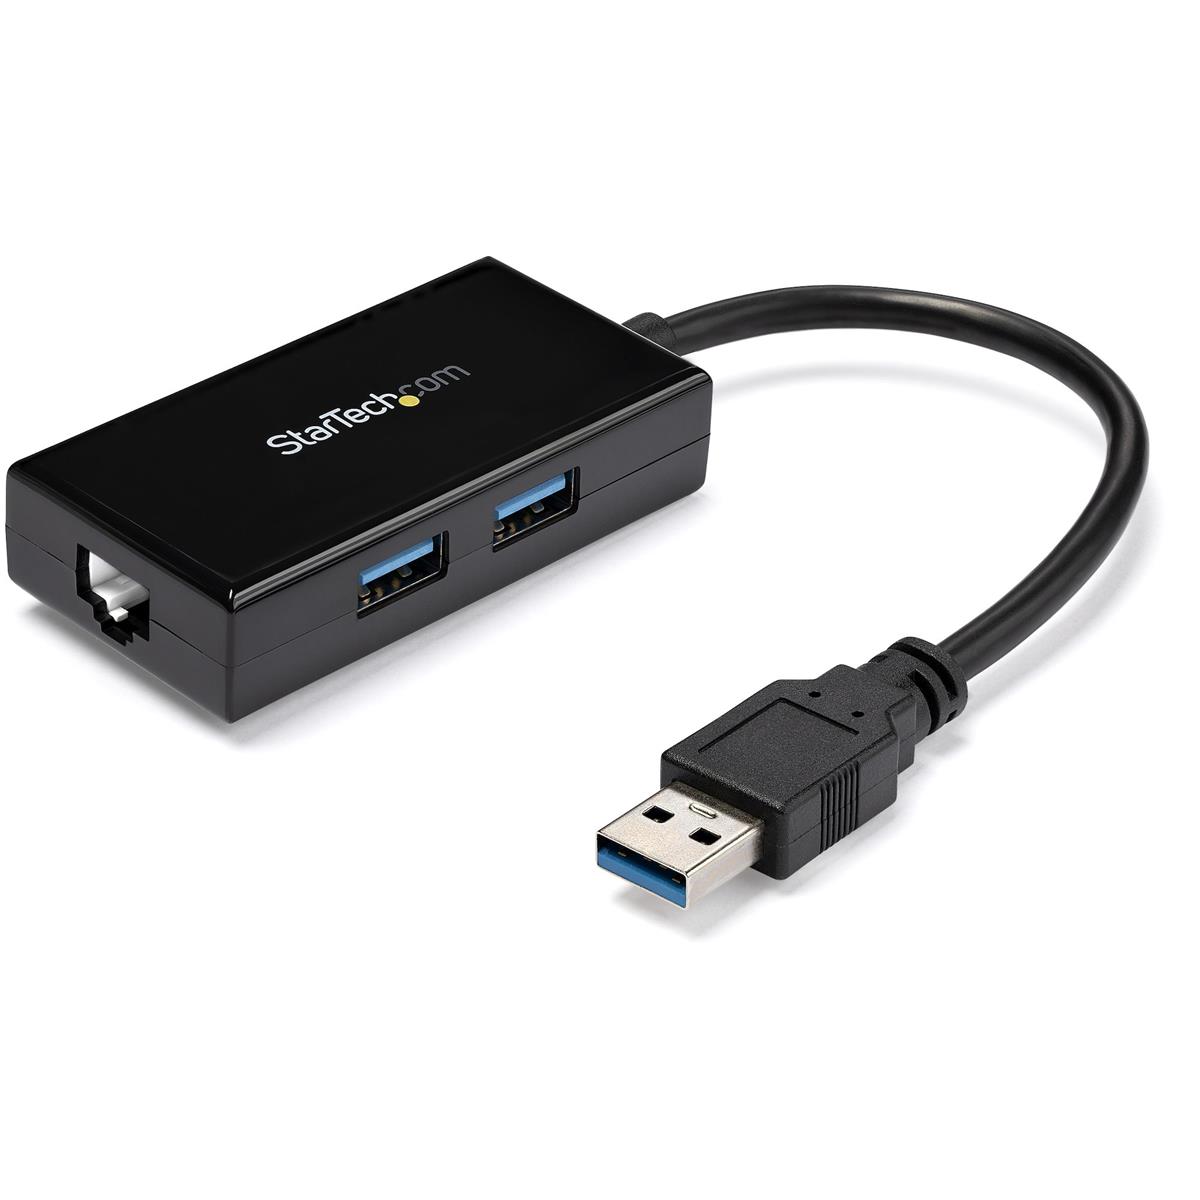 Image of StarTech USB 3.0 to Gigabit Network Adapter with Built-In 2 Port USB Hub